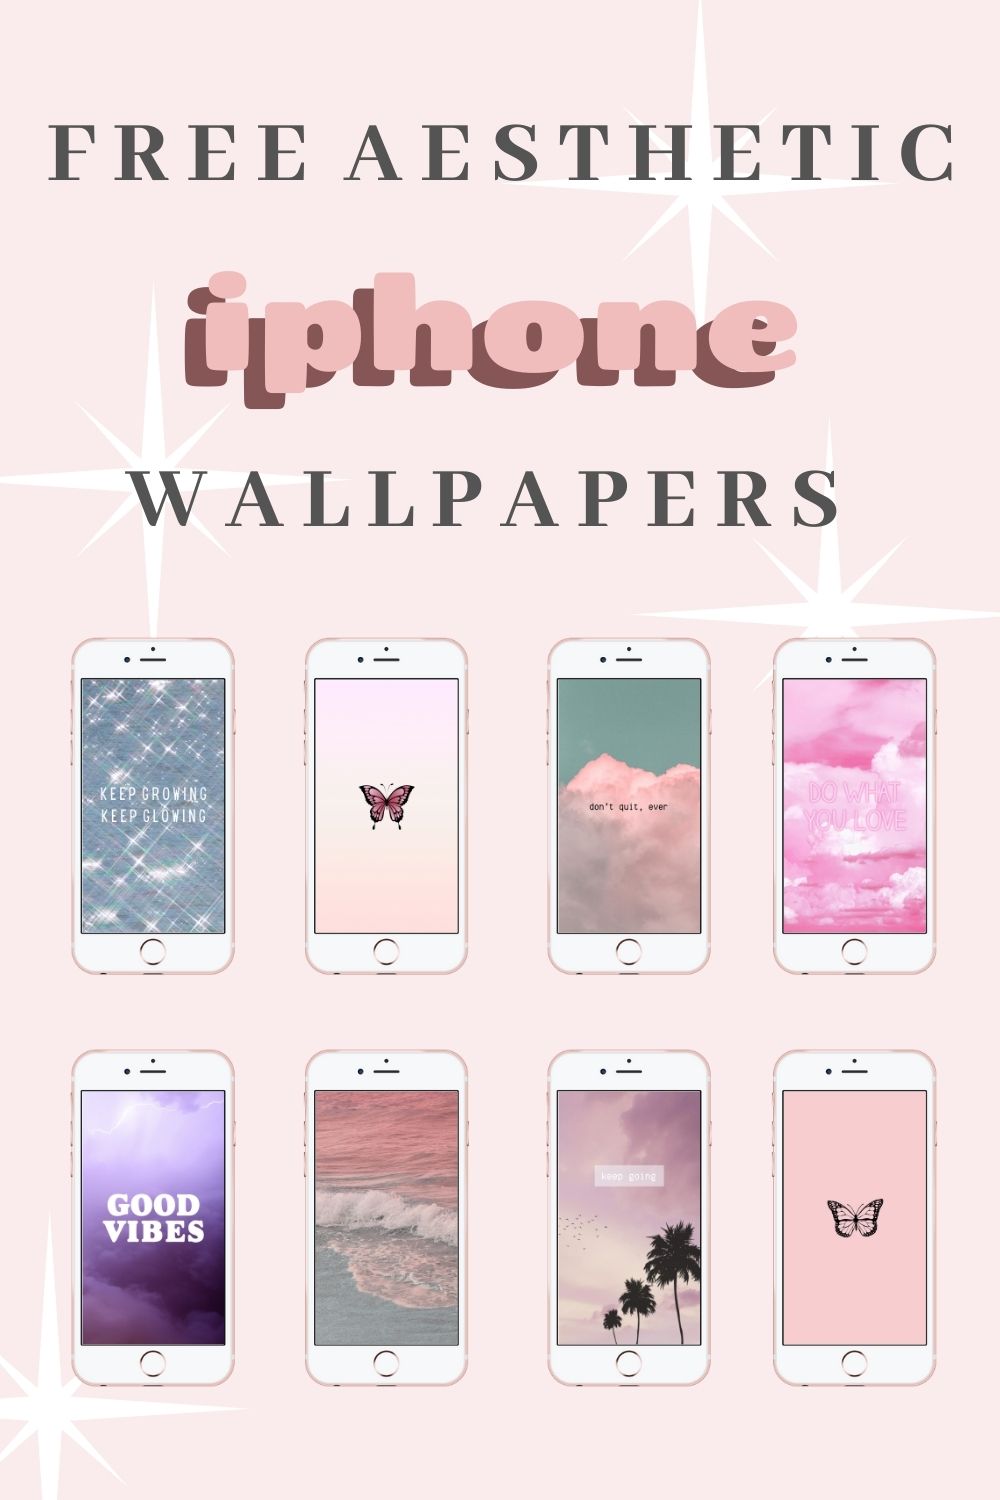 Aesthetic Iphone Wallpapers: Wallpaper Ideas That'll Make Your Phone Look Aesthetically Pleasing